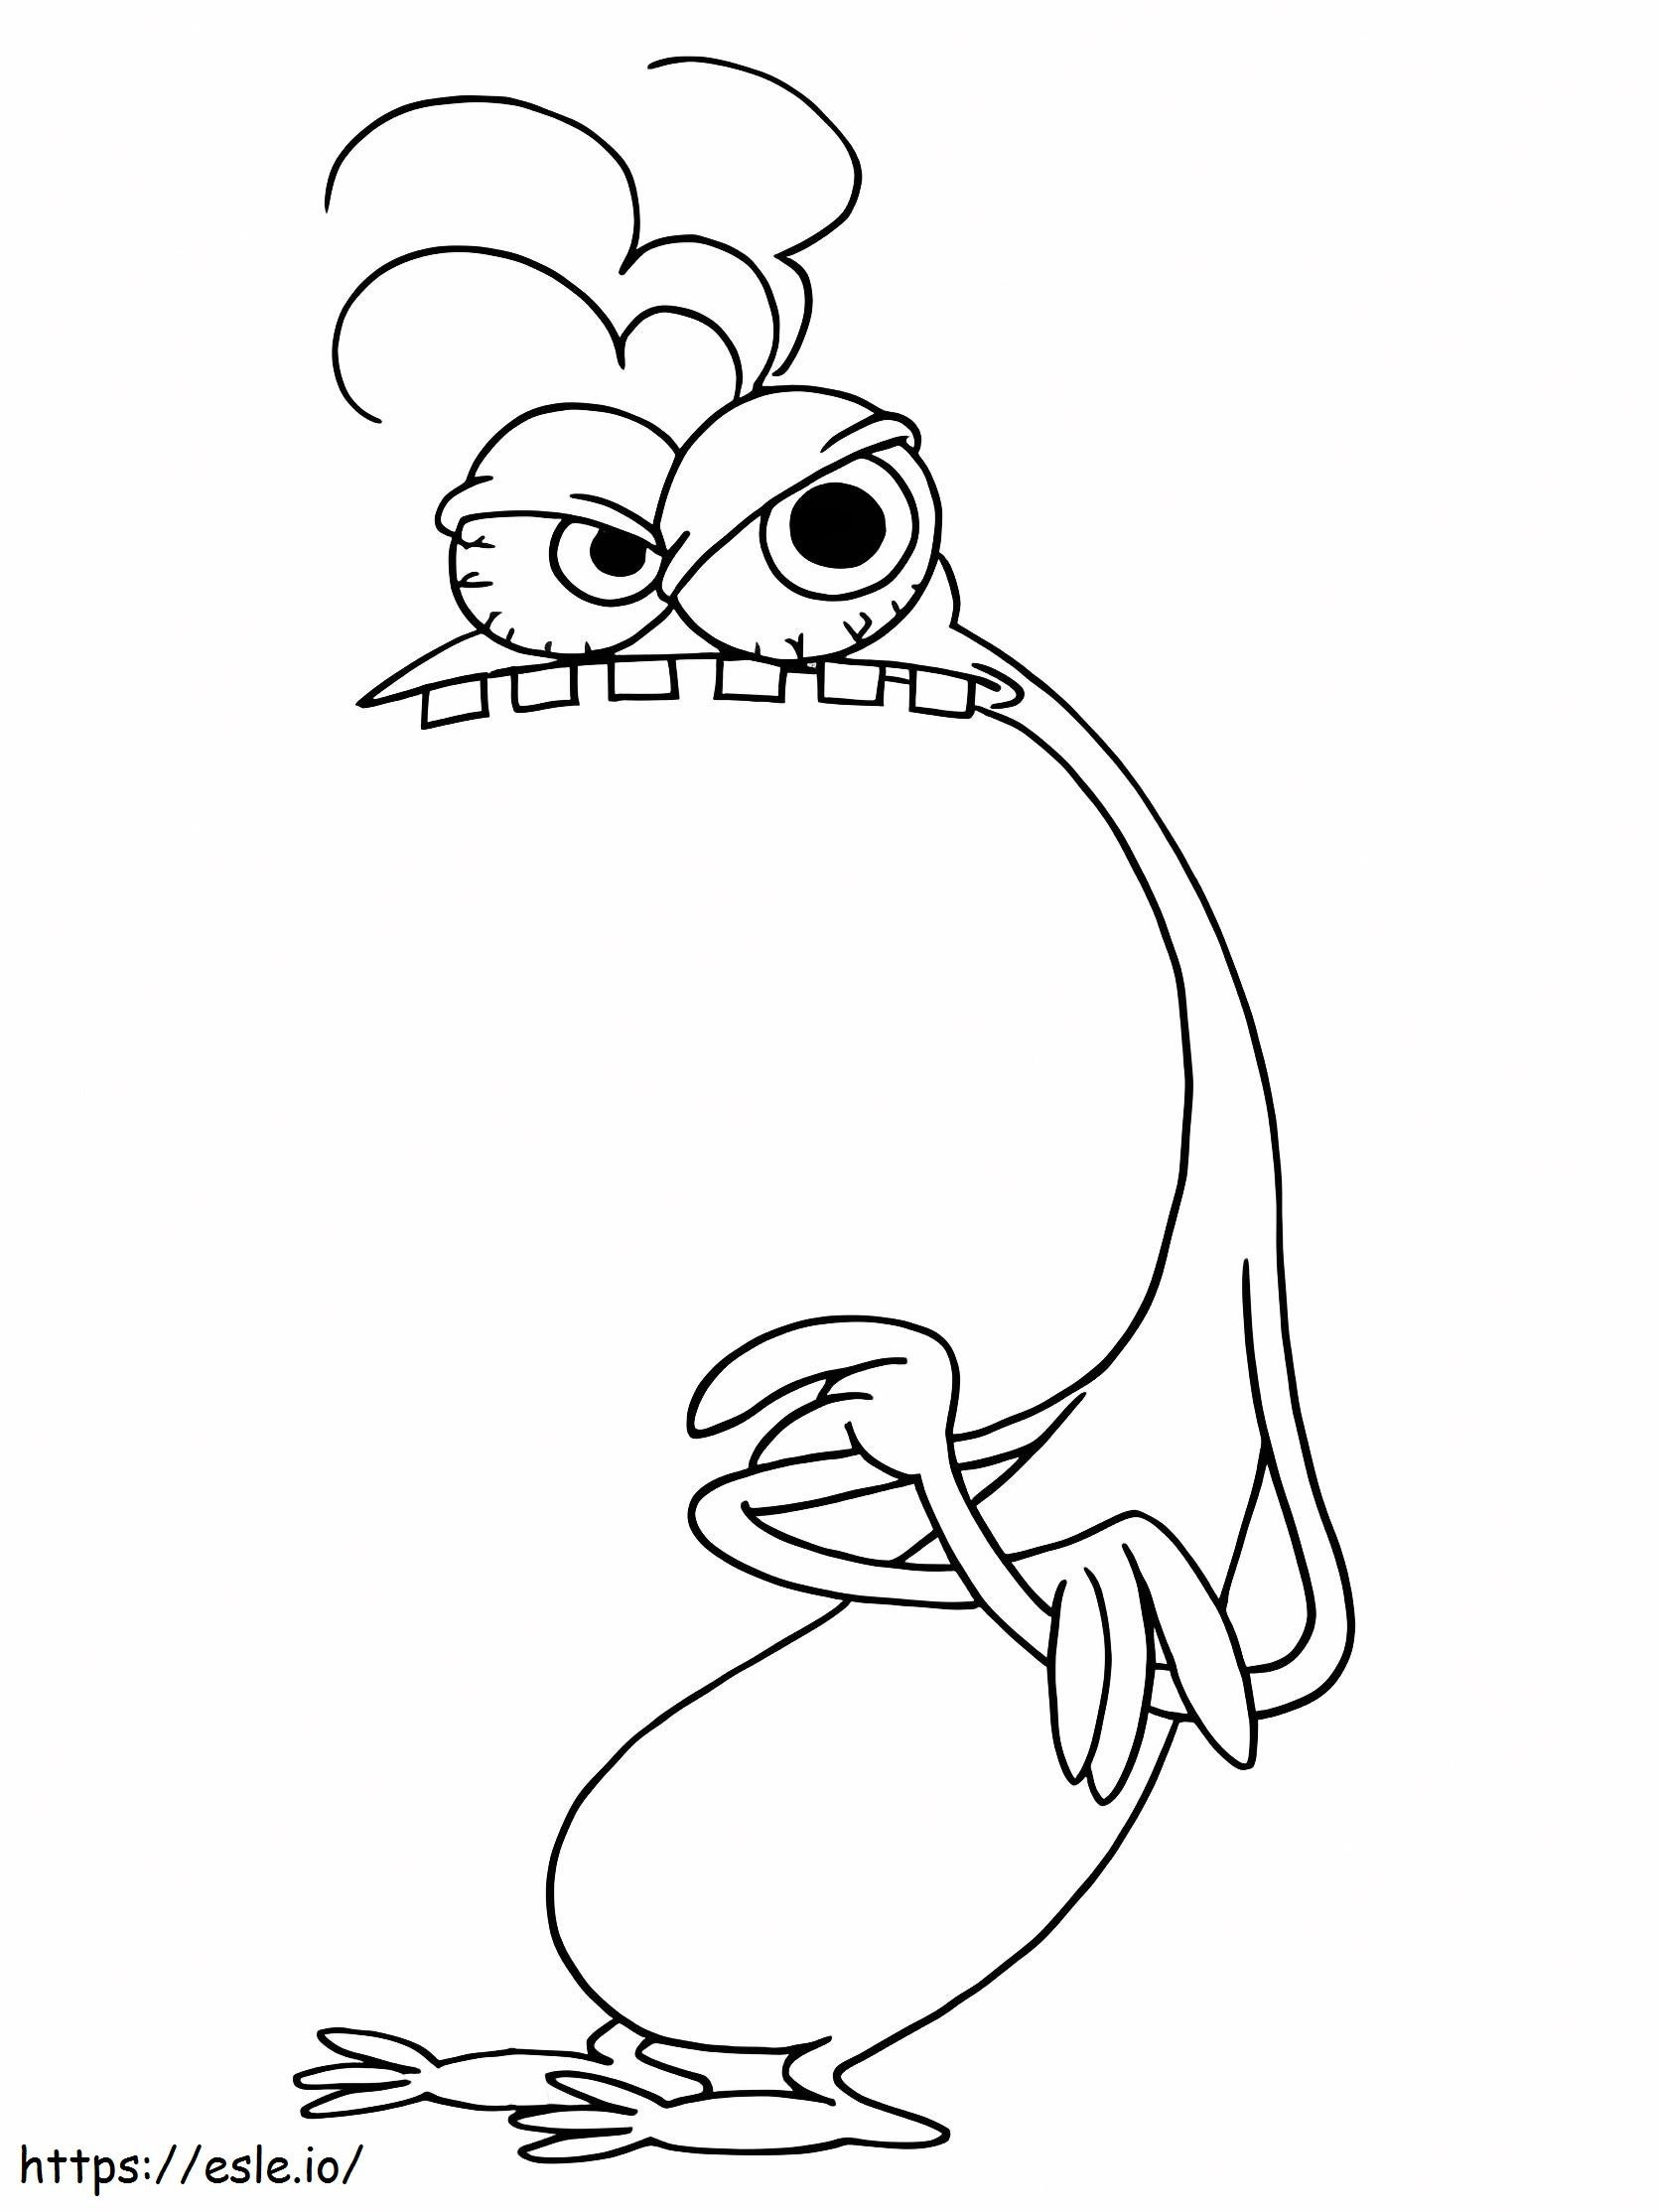 Angry Bud Budiovitch coloring page